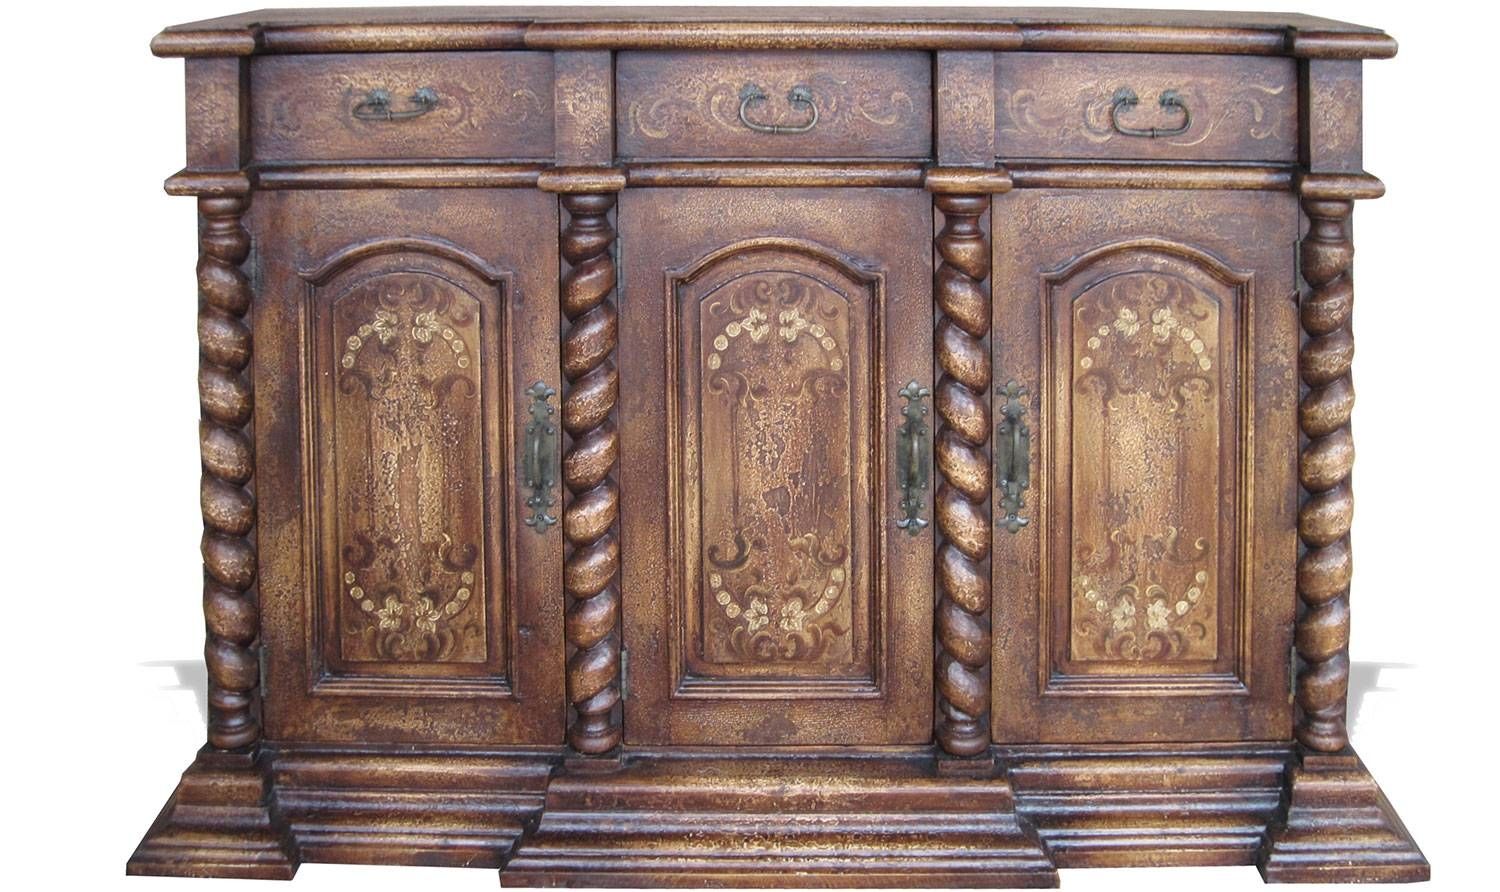 Old World Sideboard San Francisco – Hand Painted Distressed In Peru Inside Tuscany Sideboard (Photo 1 of 20)